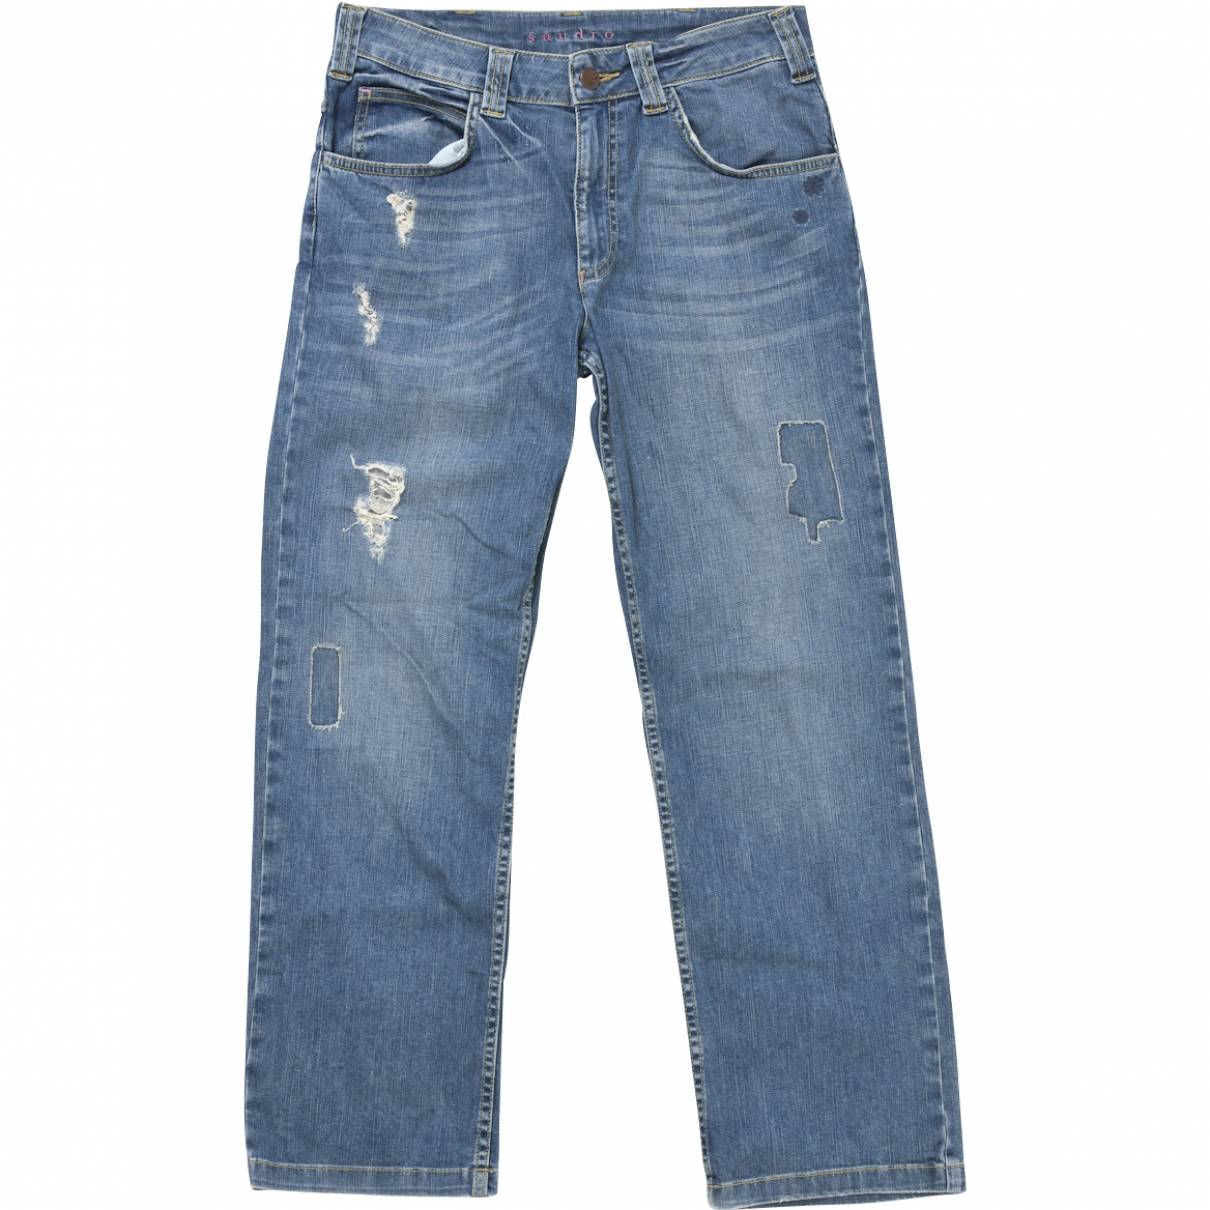 JEANS WITH A WORN EFFECT AND 5 POCKETS Sandro